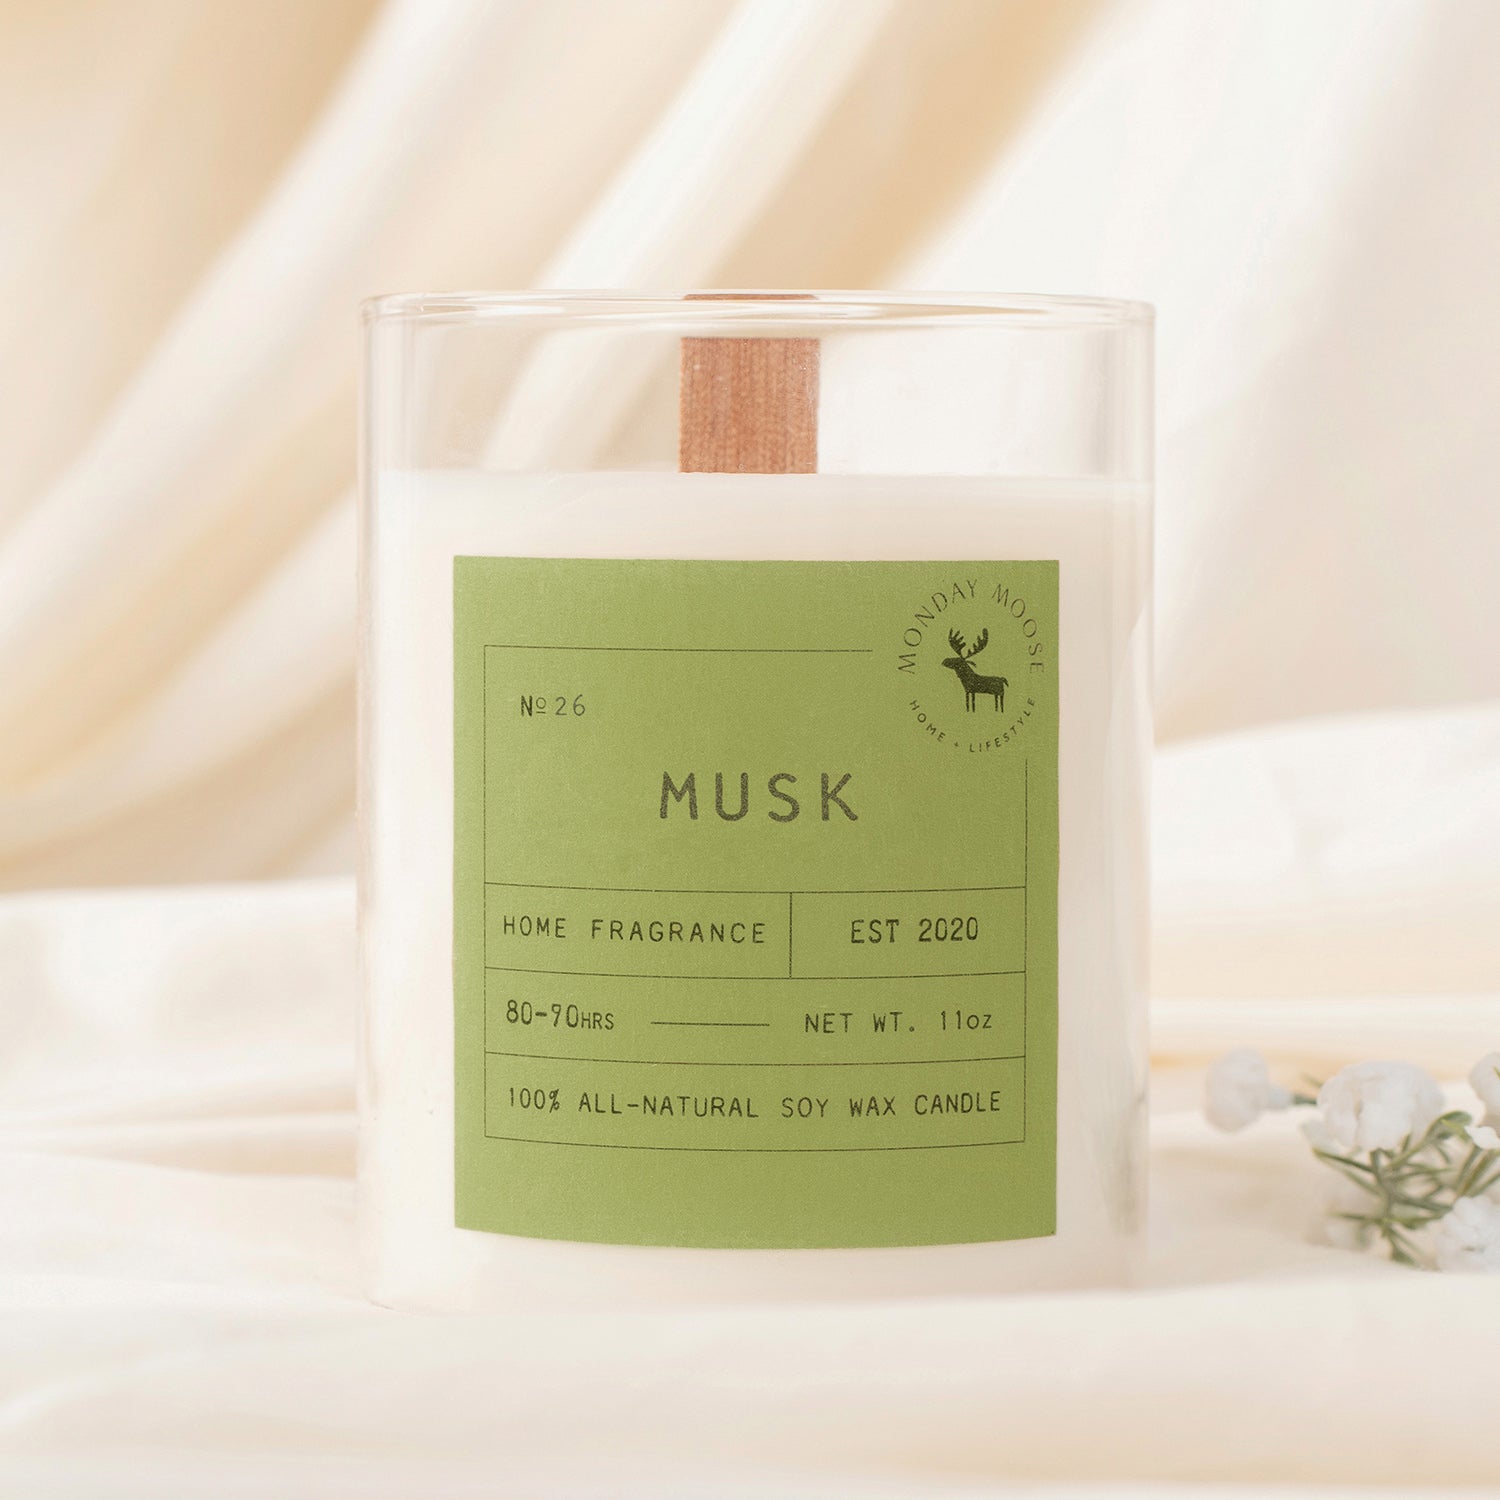 soy wax scented candle home fragrance musk